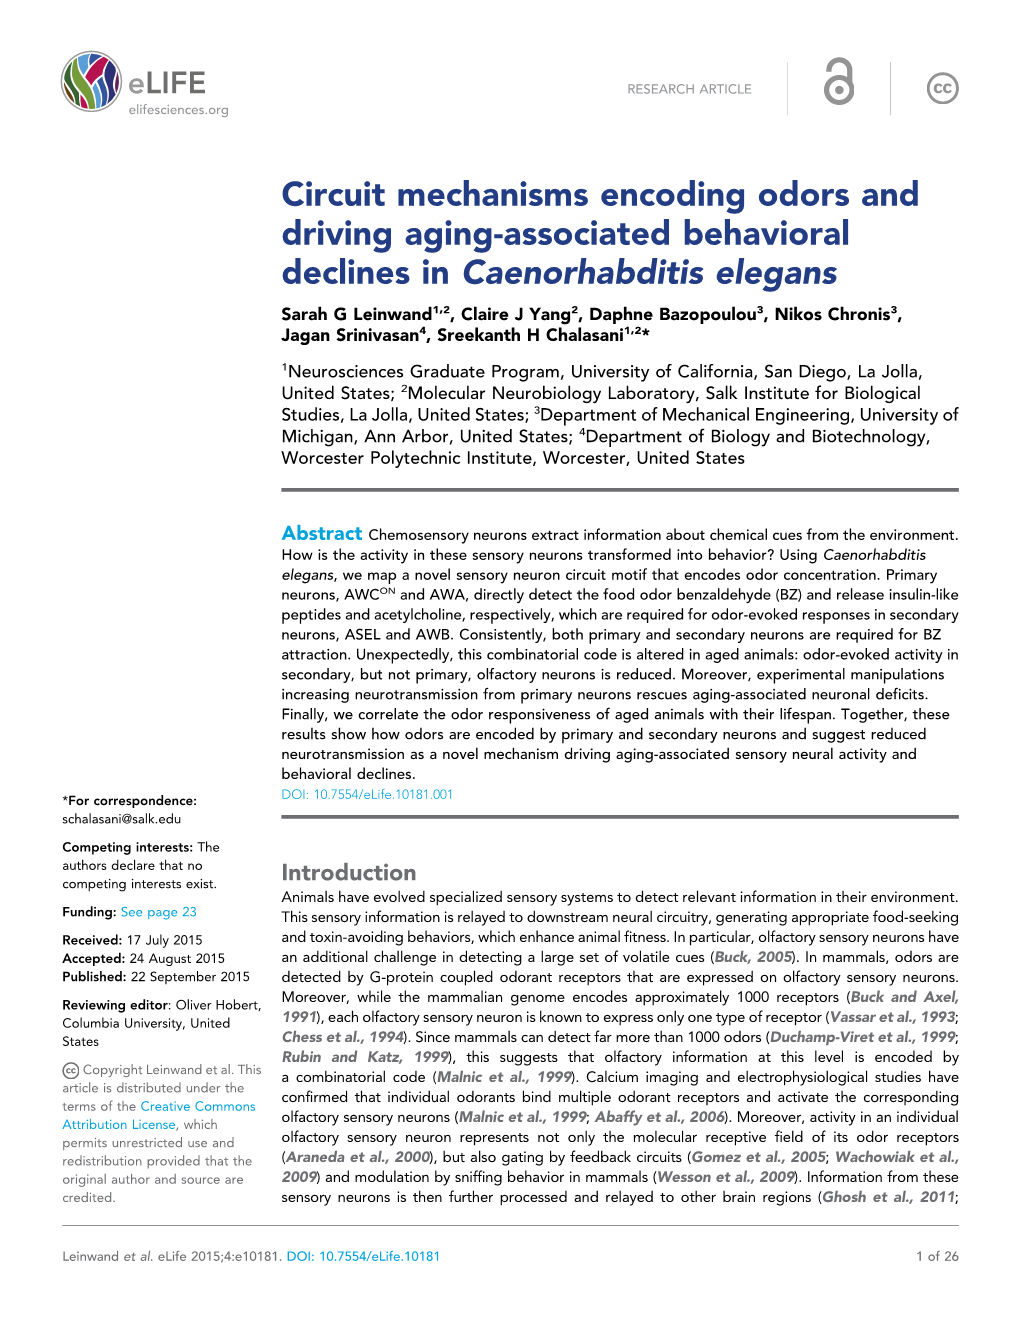 Circuit Mechanisms Encoding Odors and Driving Aging-Associated